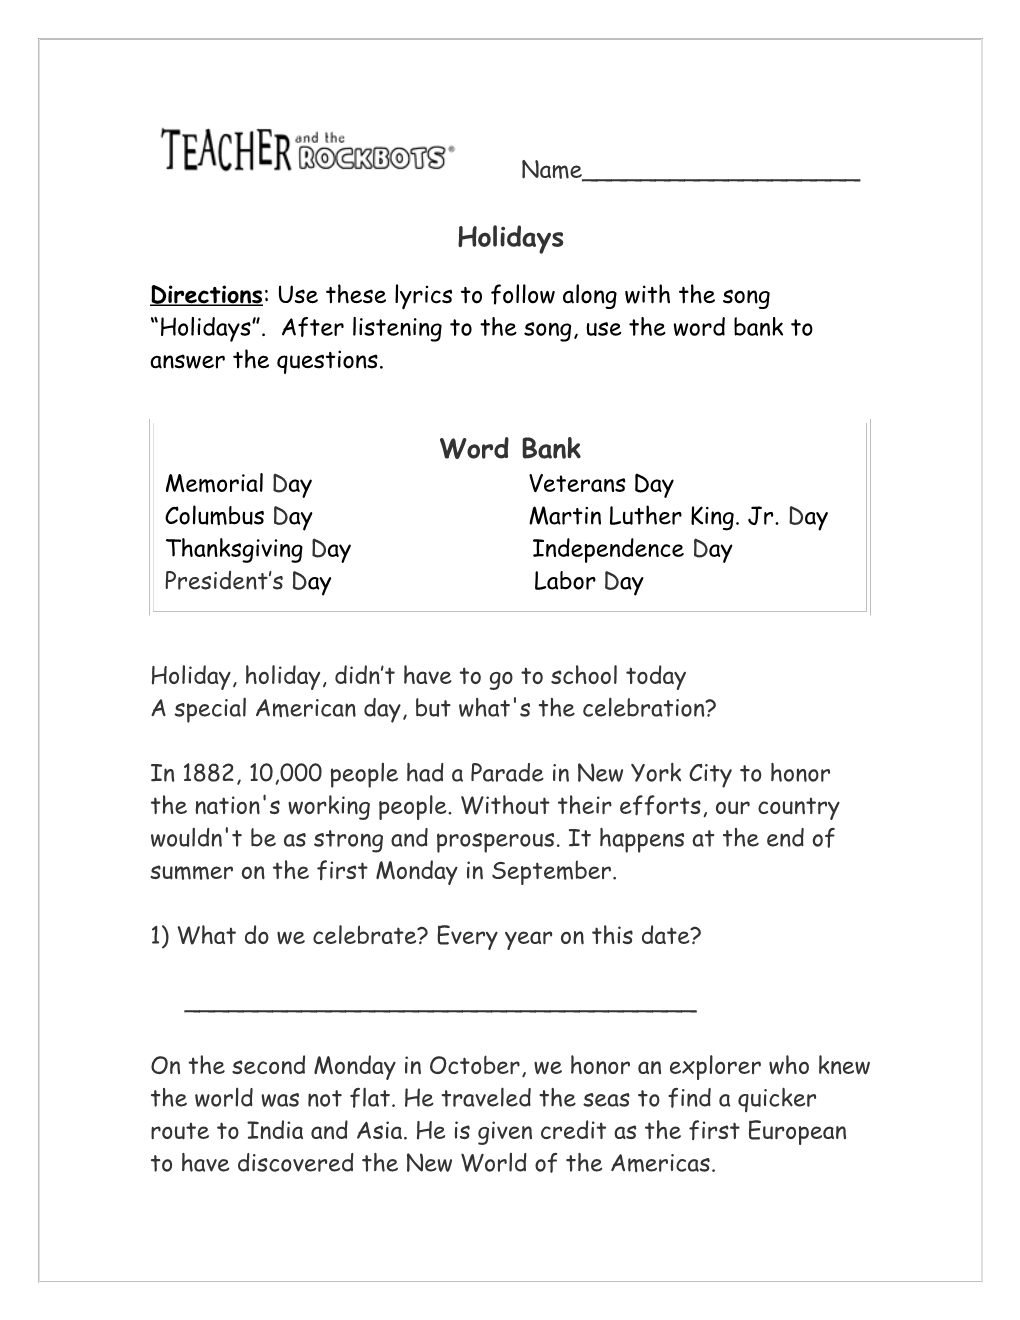 1) What Do We Celebrate? Every Year on This Date?